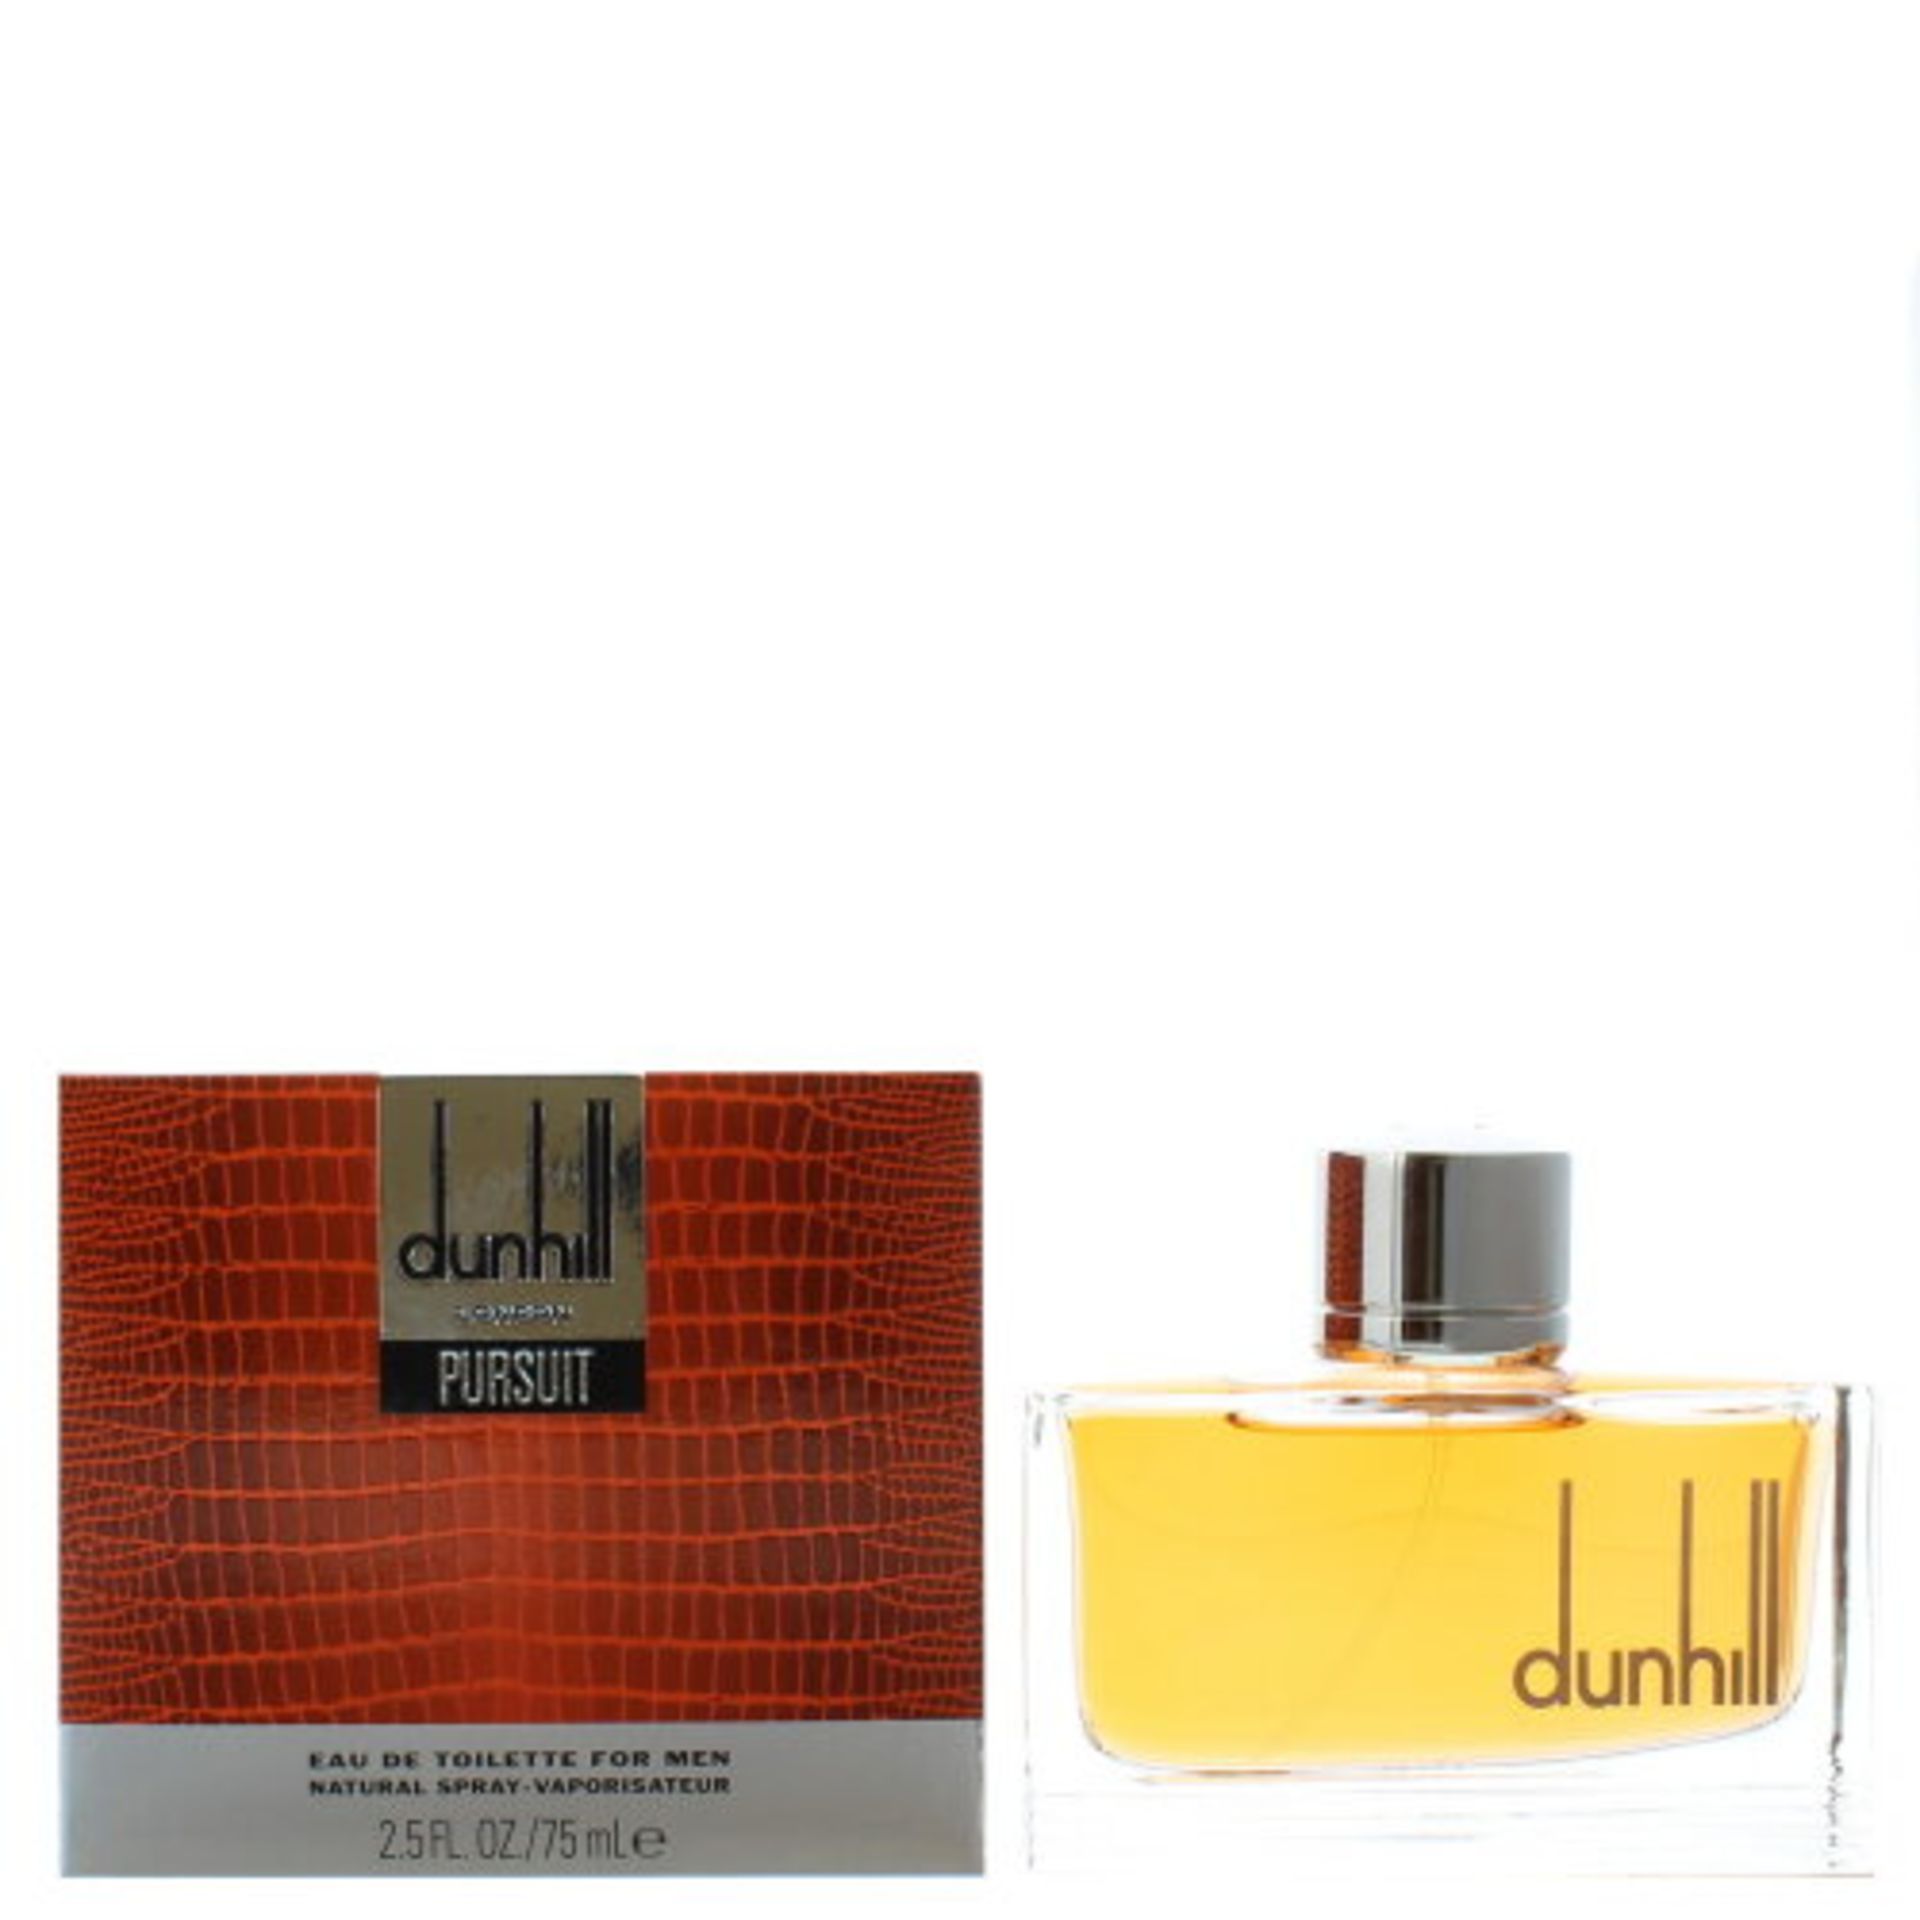 DUNHILL AFTERSHAVE - Image 2 of 3